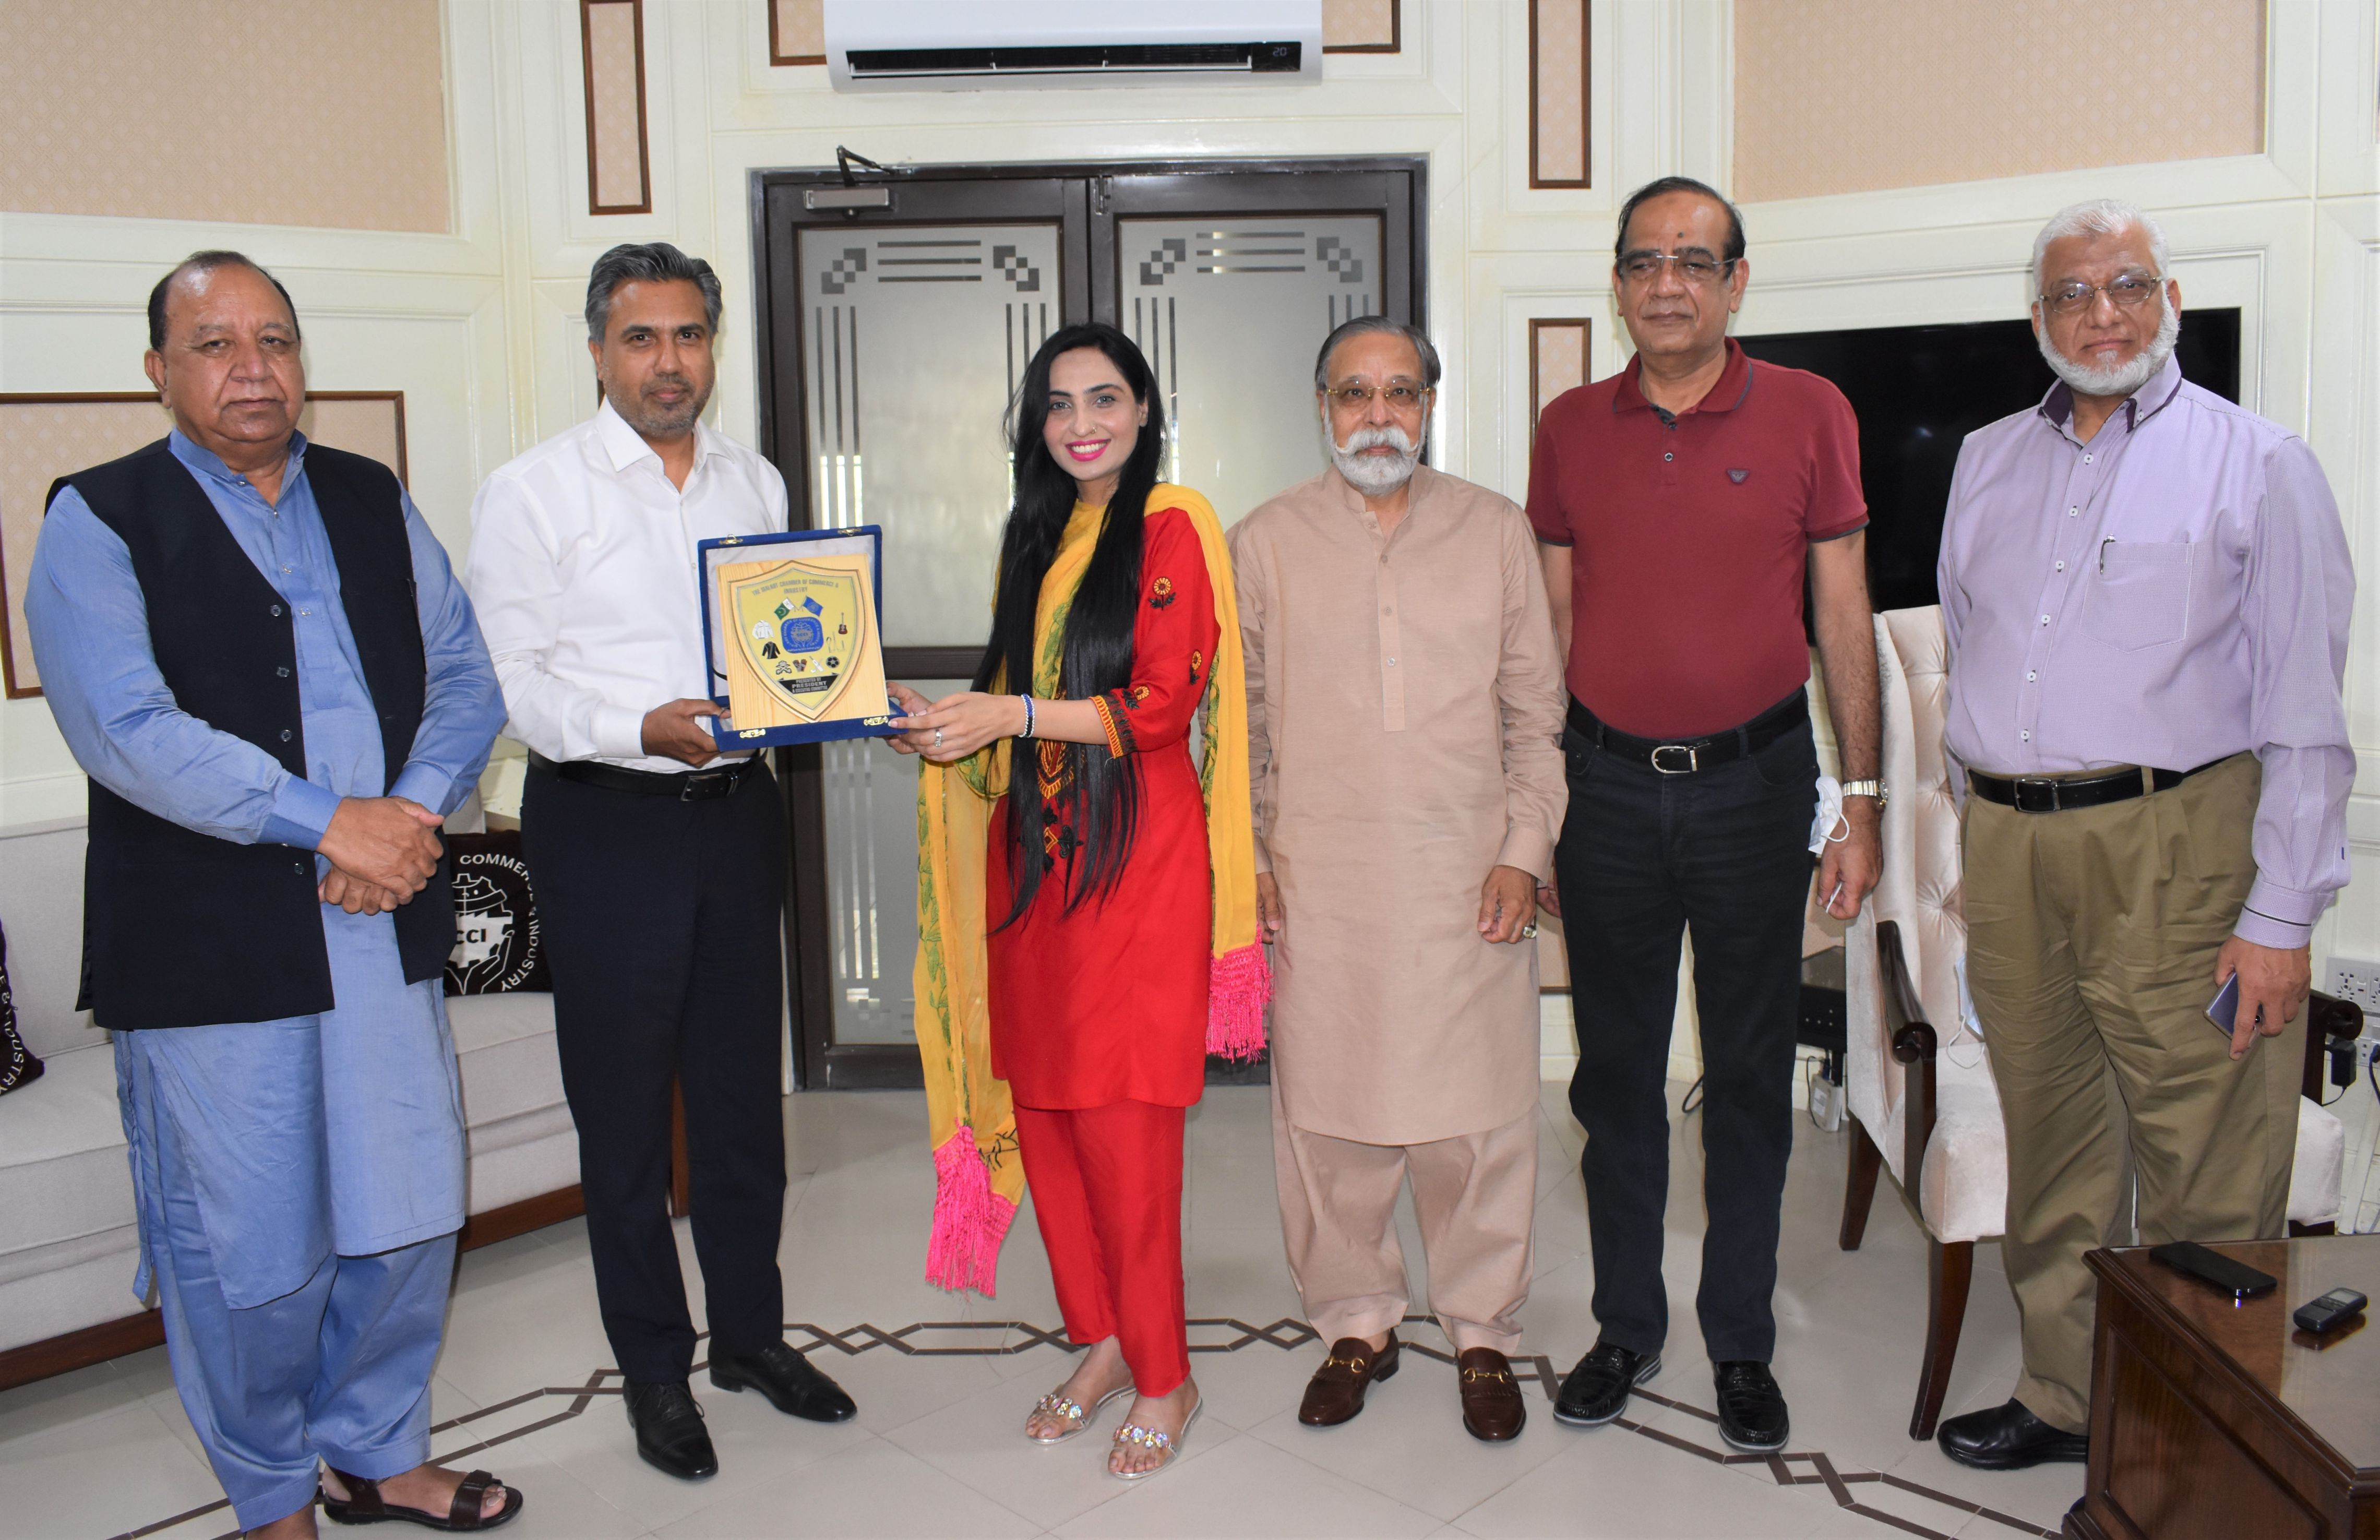 On May 29, 2021, Mr. Qaisar Iqbal Baryar, President, SCCI had a meeting with Dr. Andeela Sehar Fatima, Cluster Manager, Cluster Development Initiative (CDI/PSIC) to discuss the matters pertaining to the Establishment of “Sialkot Surgical City”.